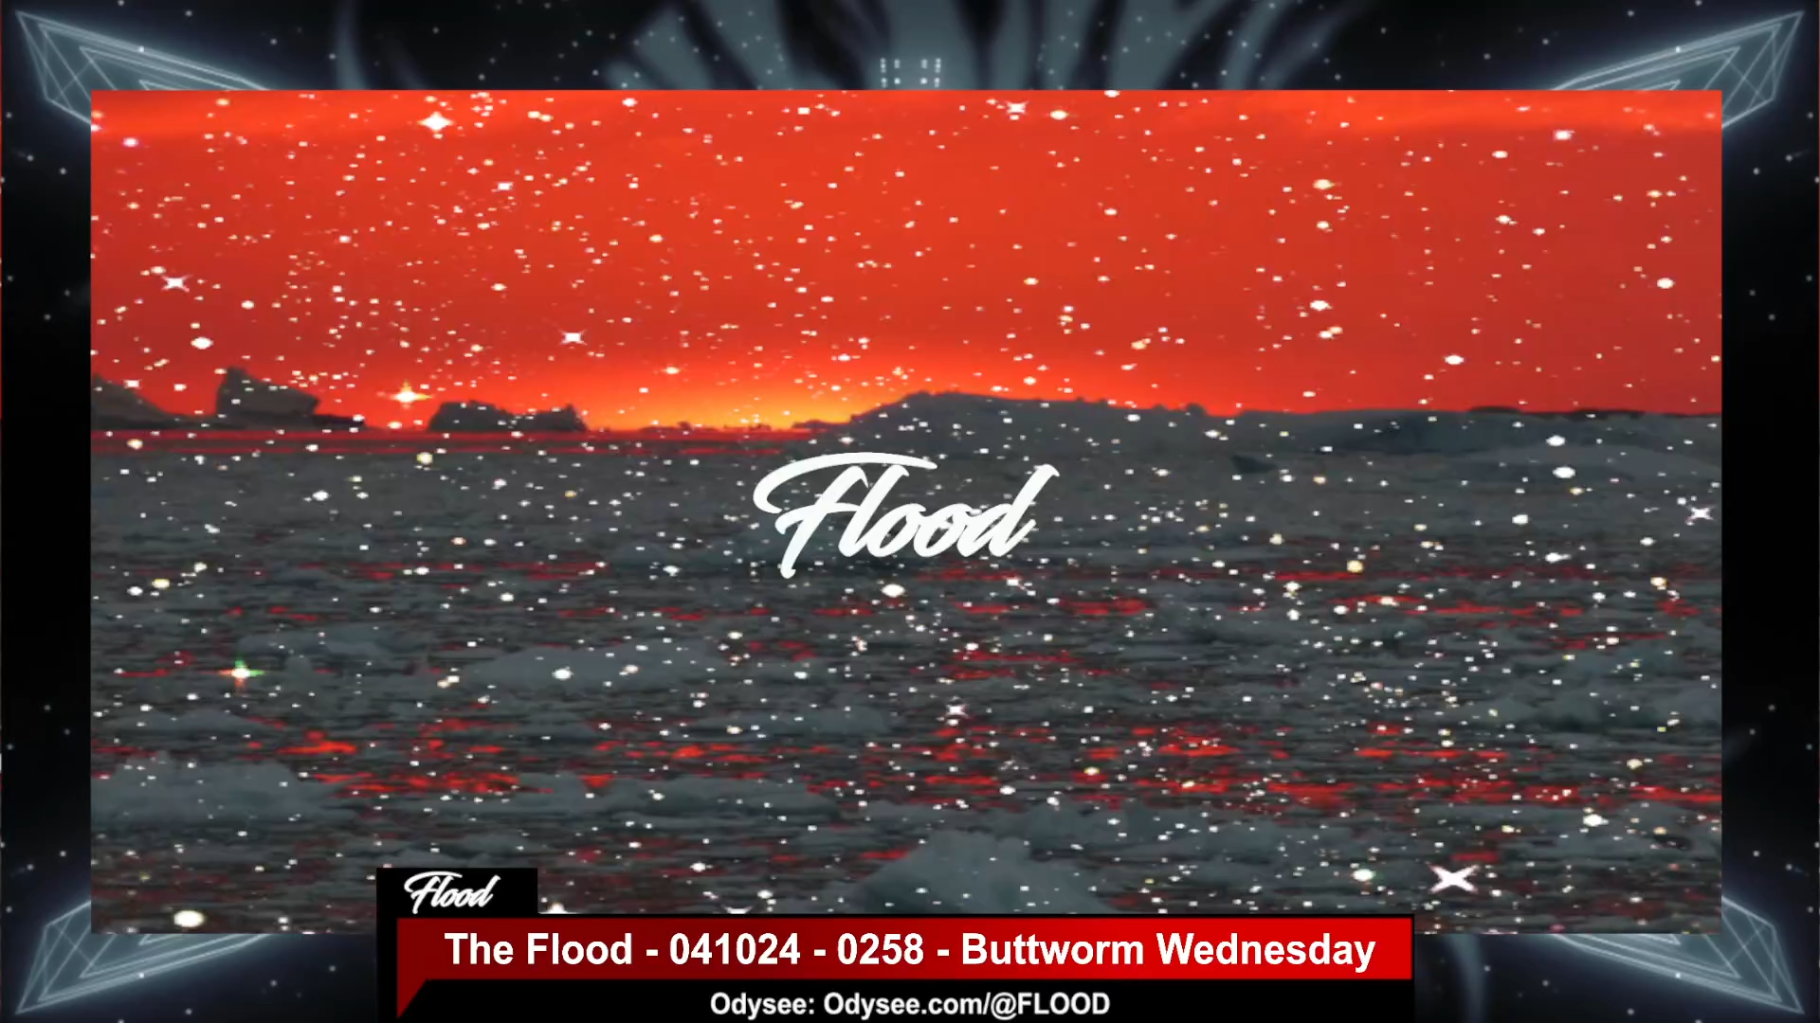 The Flood - 041024 - 0258 - Buttworm Wednesday